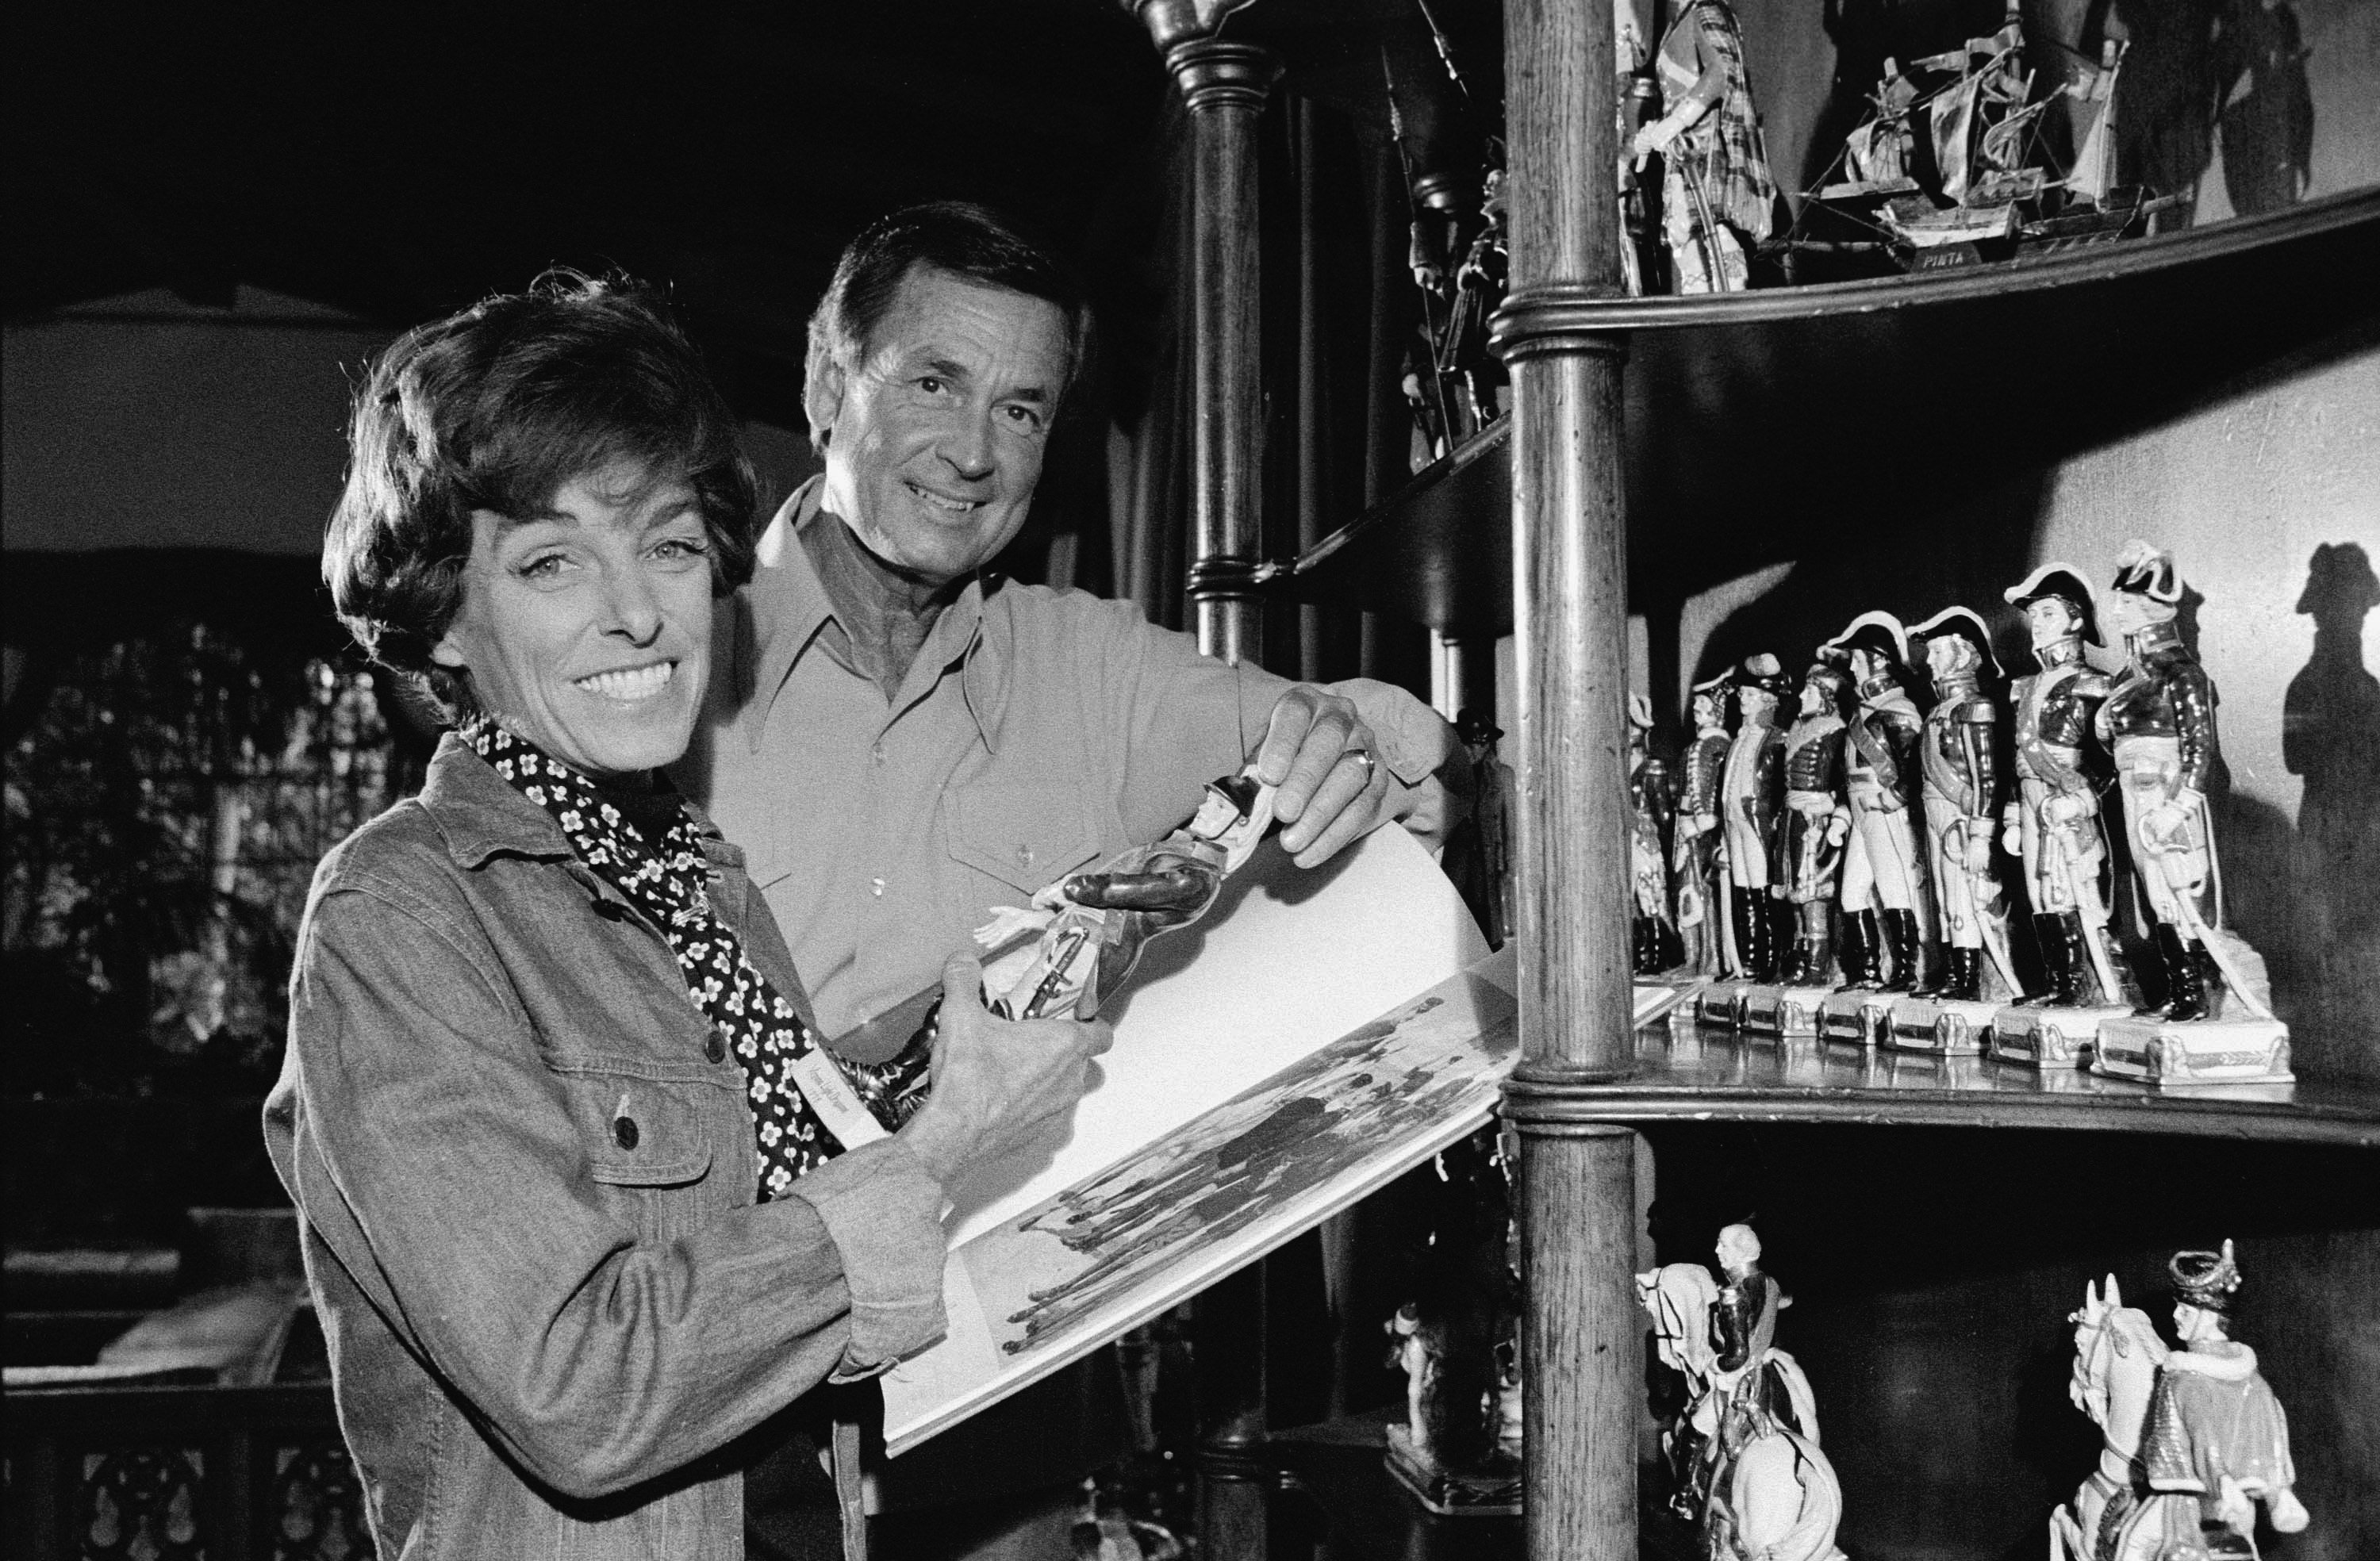 Bob Barker and his wife Dorothy Jo (1924 - 1981) show off part of their extensive collection of military-themed ceramic figurines on November 4, 1977. | Source: Getty Images